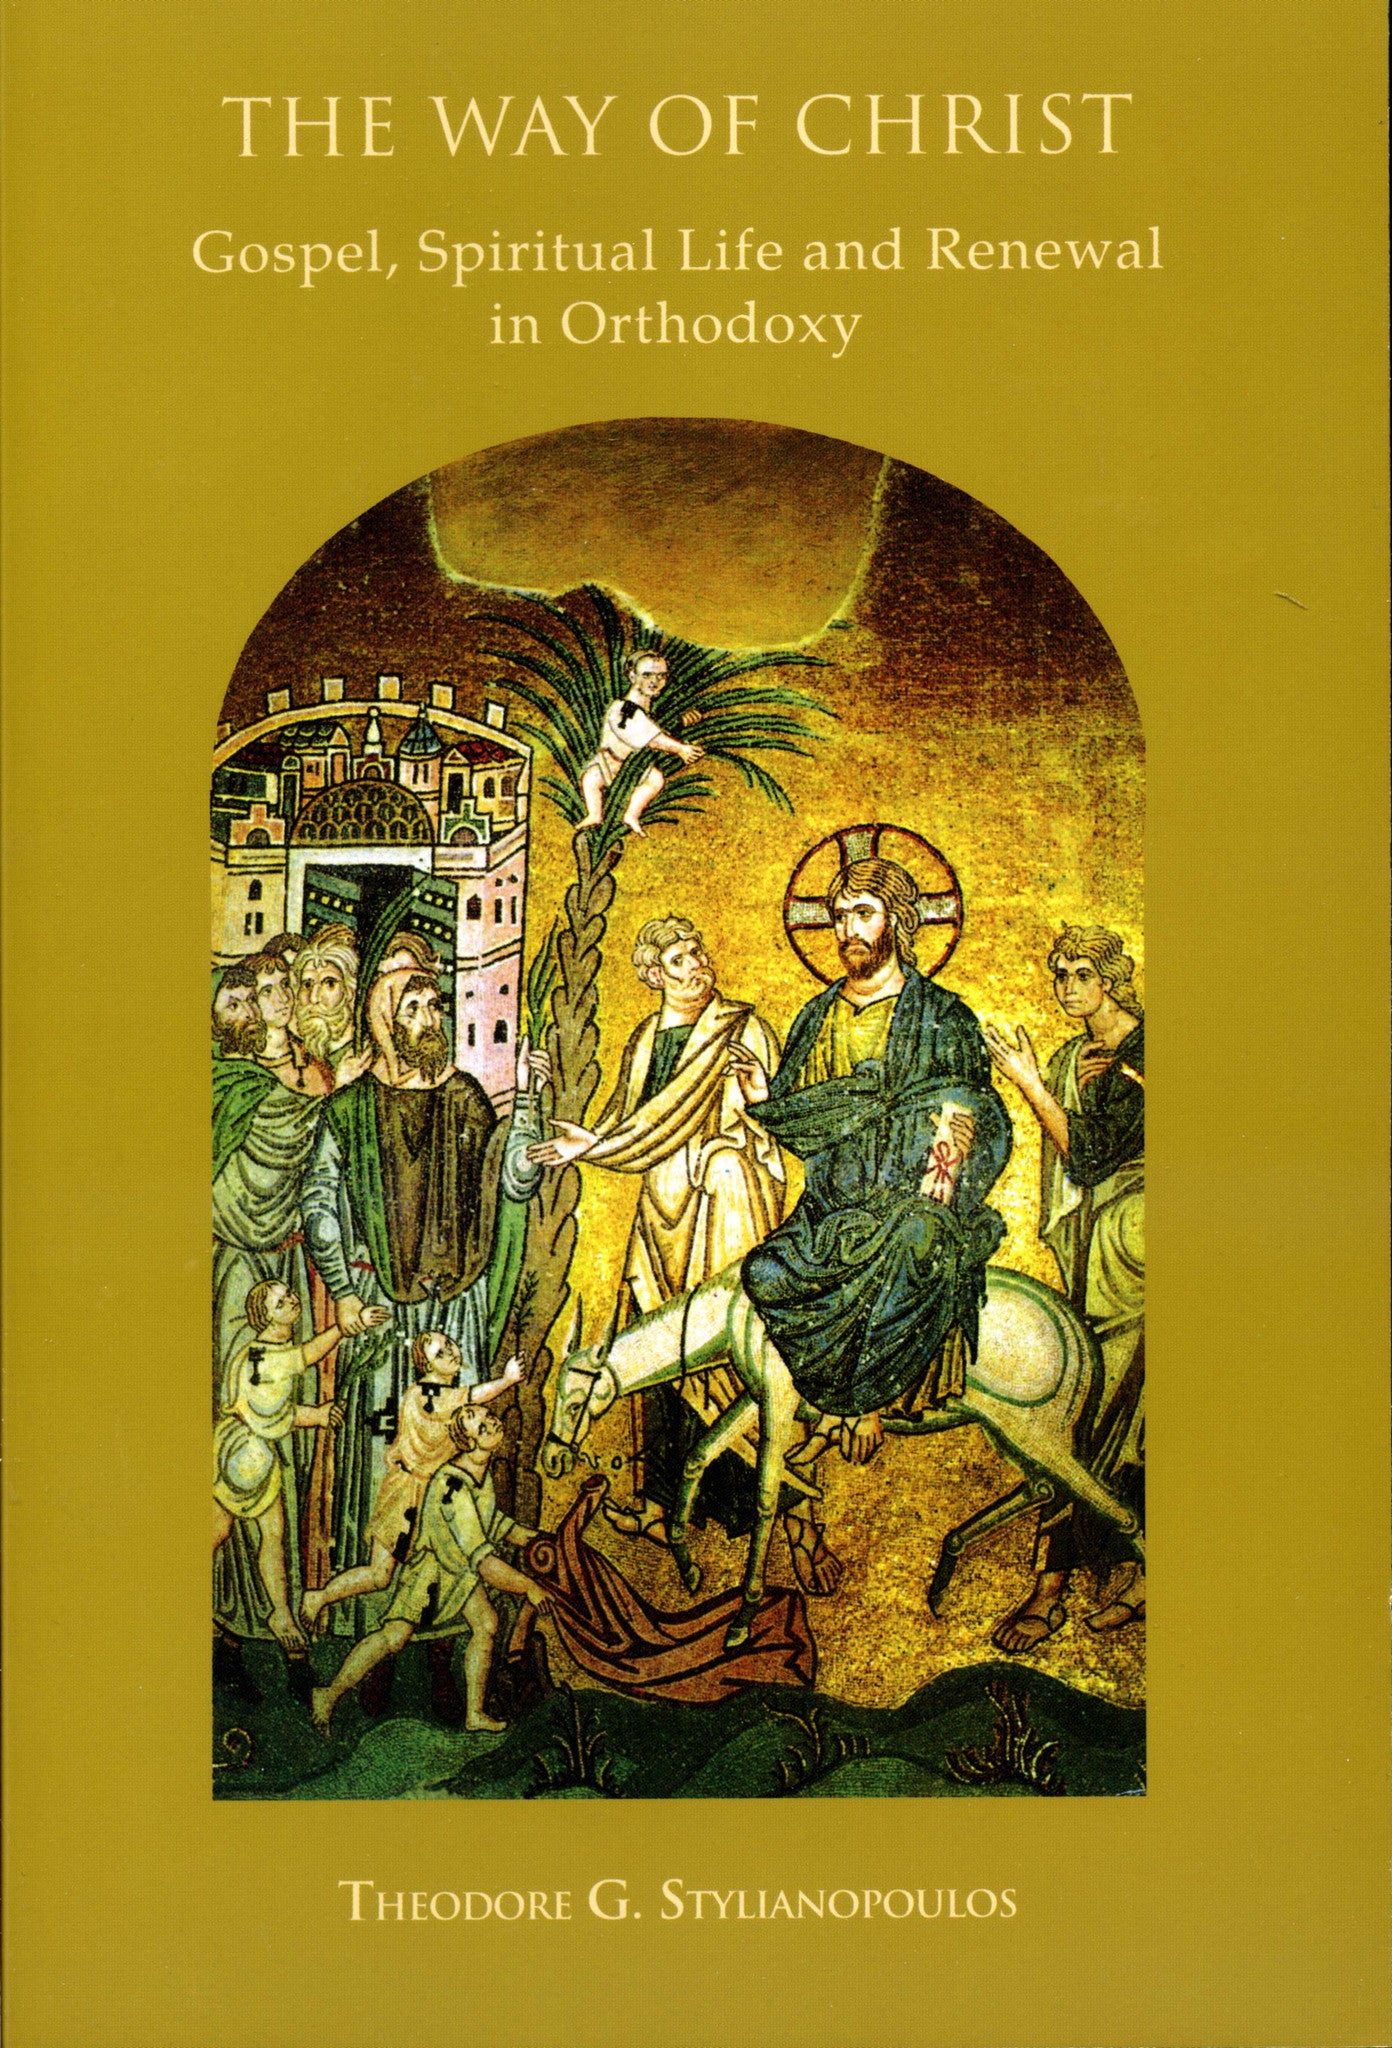 The Way of Christ: Gospel, Spiritual Life and Renewal in Orthodoxy